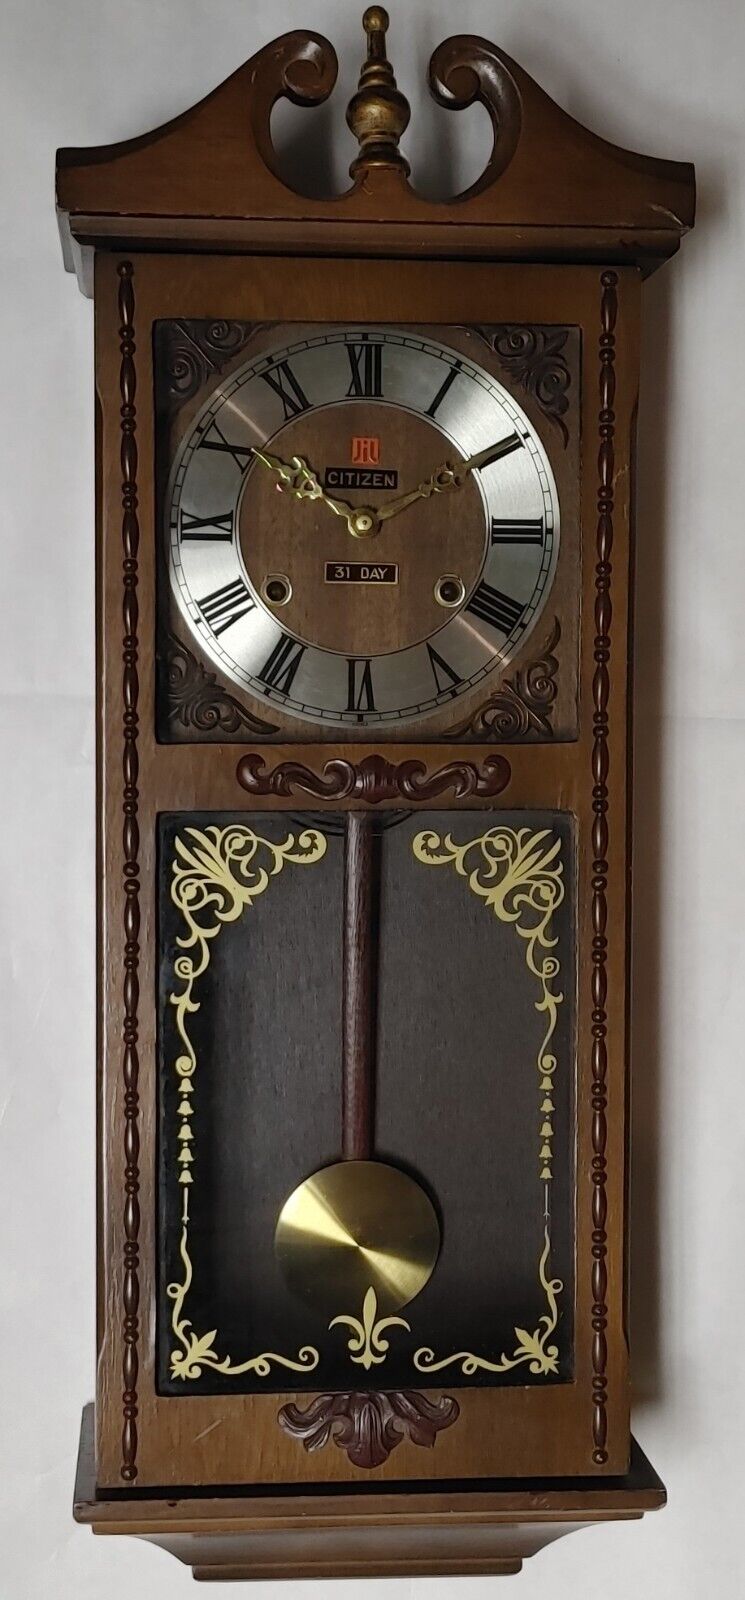 VINTAGE CITIZEN 31 DAY WINDING WALL CLOCK WITH CHIMES, MADE IN KOREA.